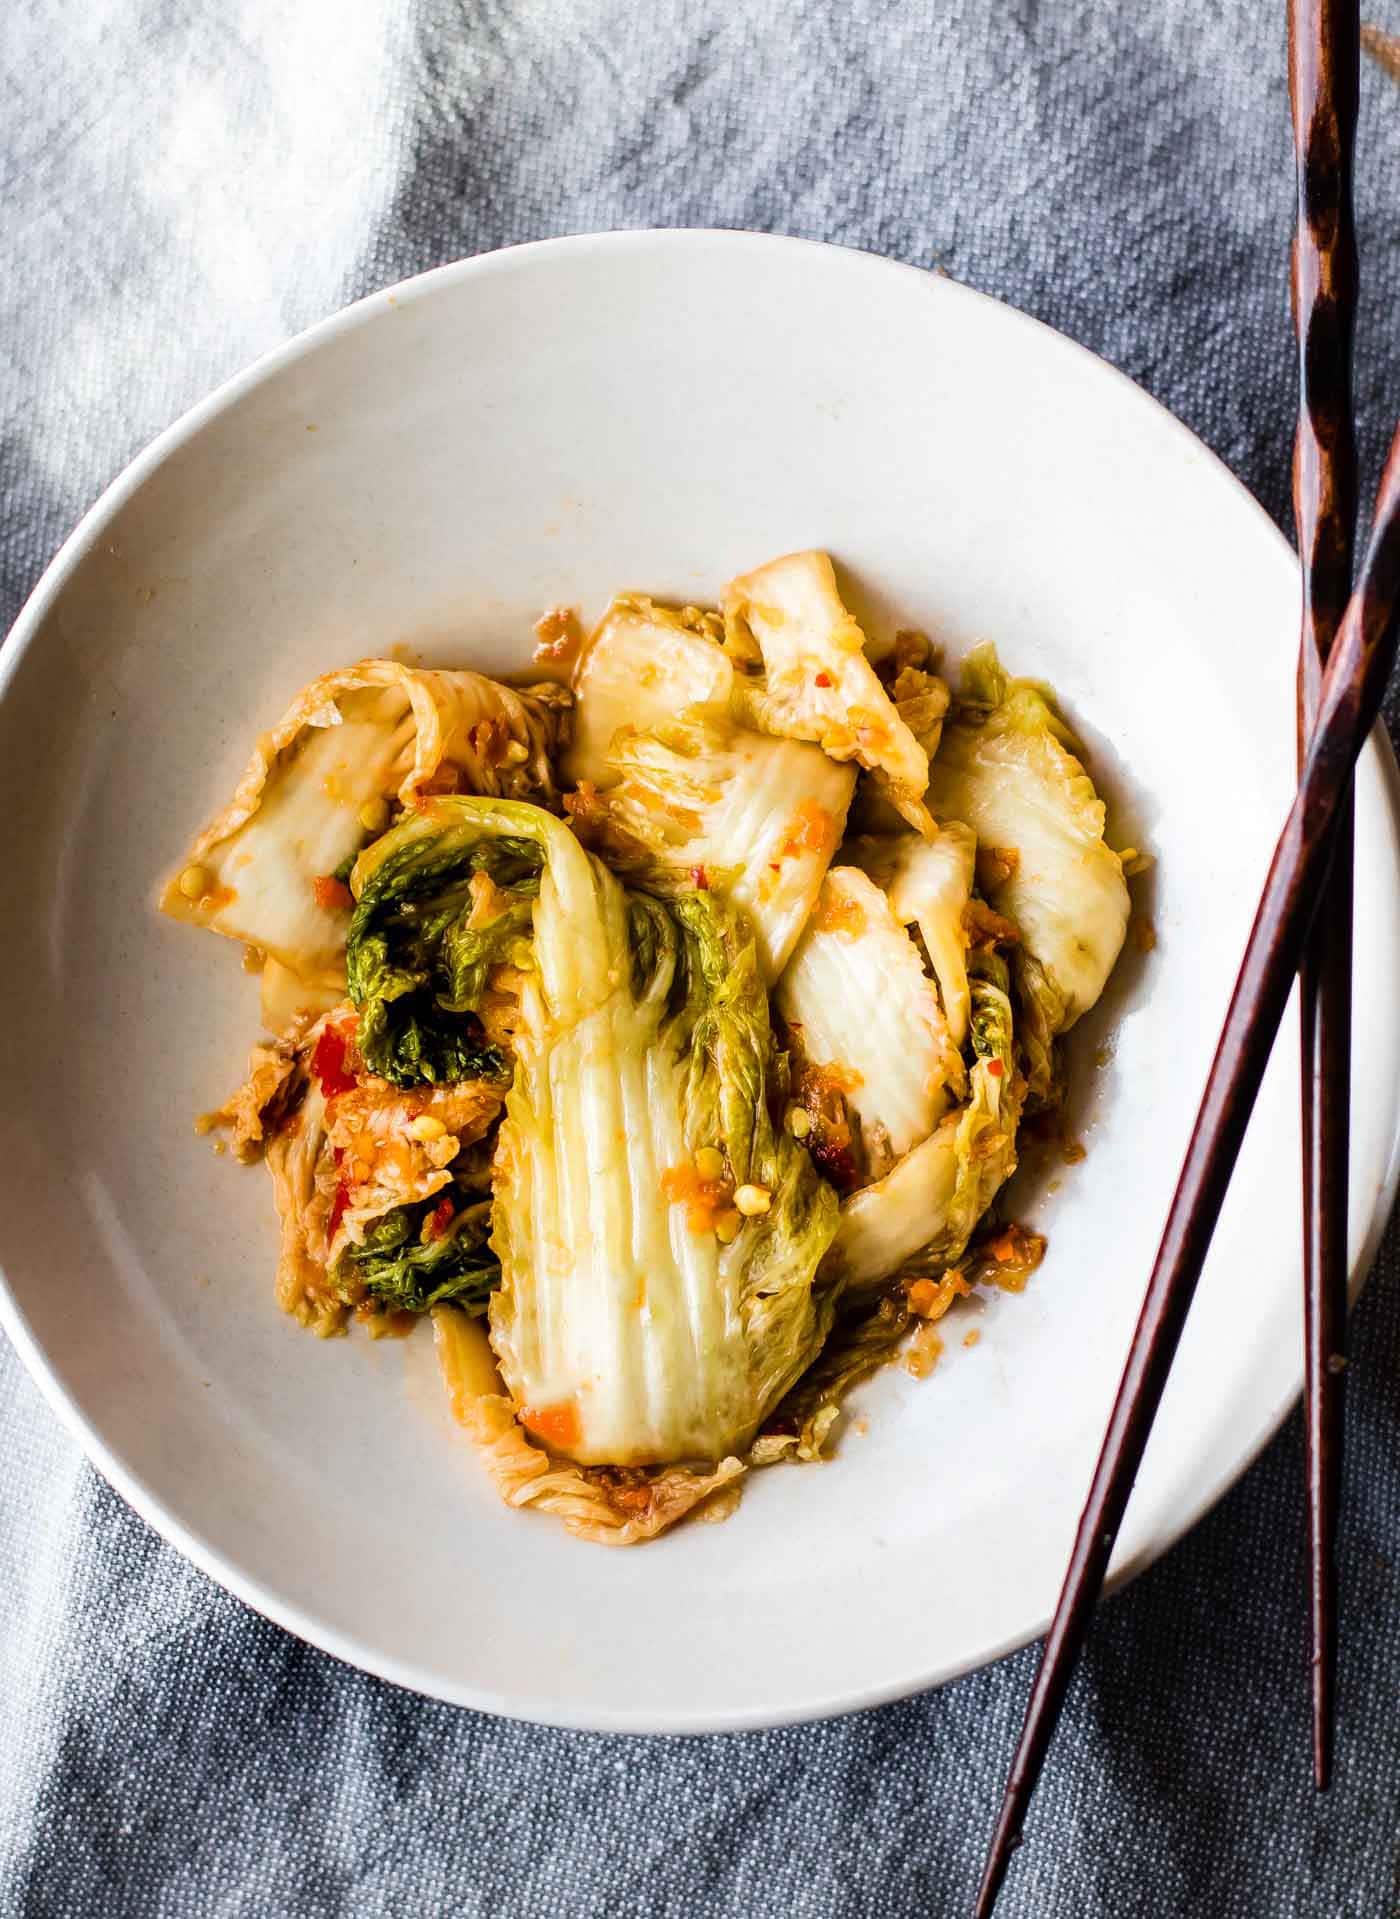 Easy homemade kimchi with red pepper flakes plated on a shallow bowl with chopsticks on the side.